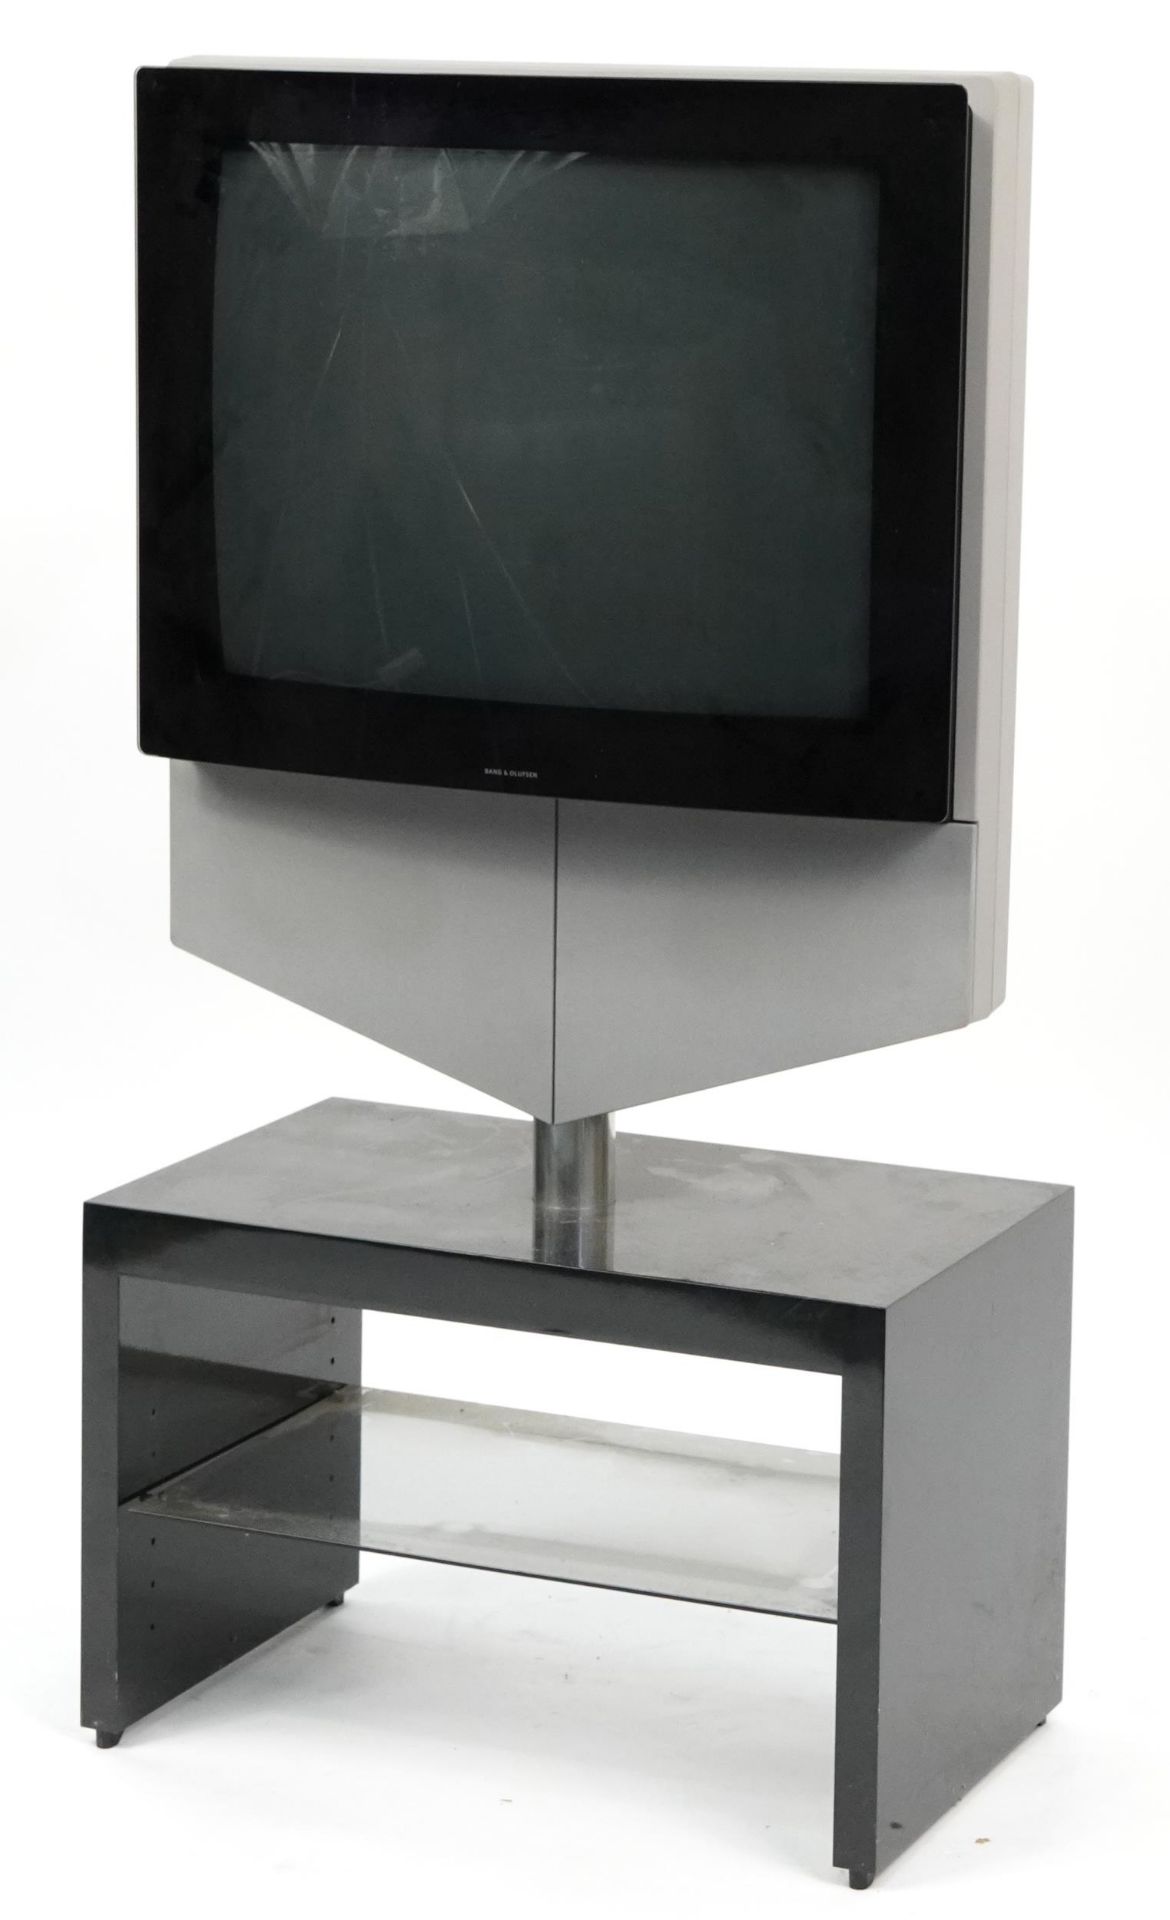 Bang & Olufsen Beovision 1 television on stand, serial number 17547733 For further information on